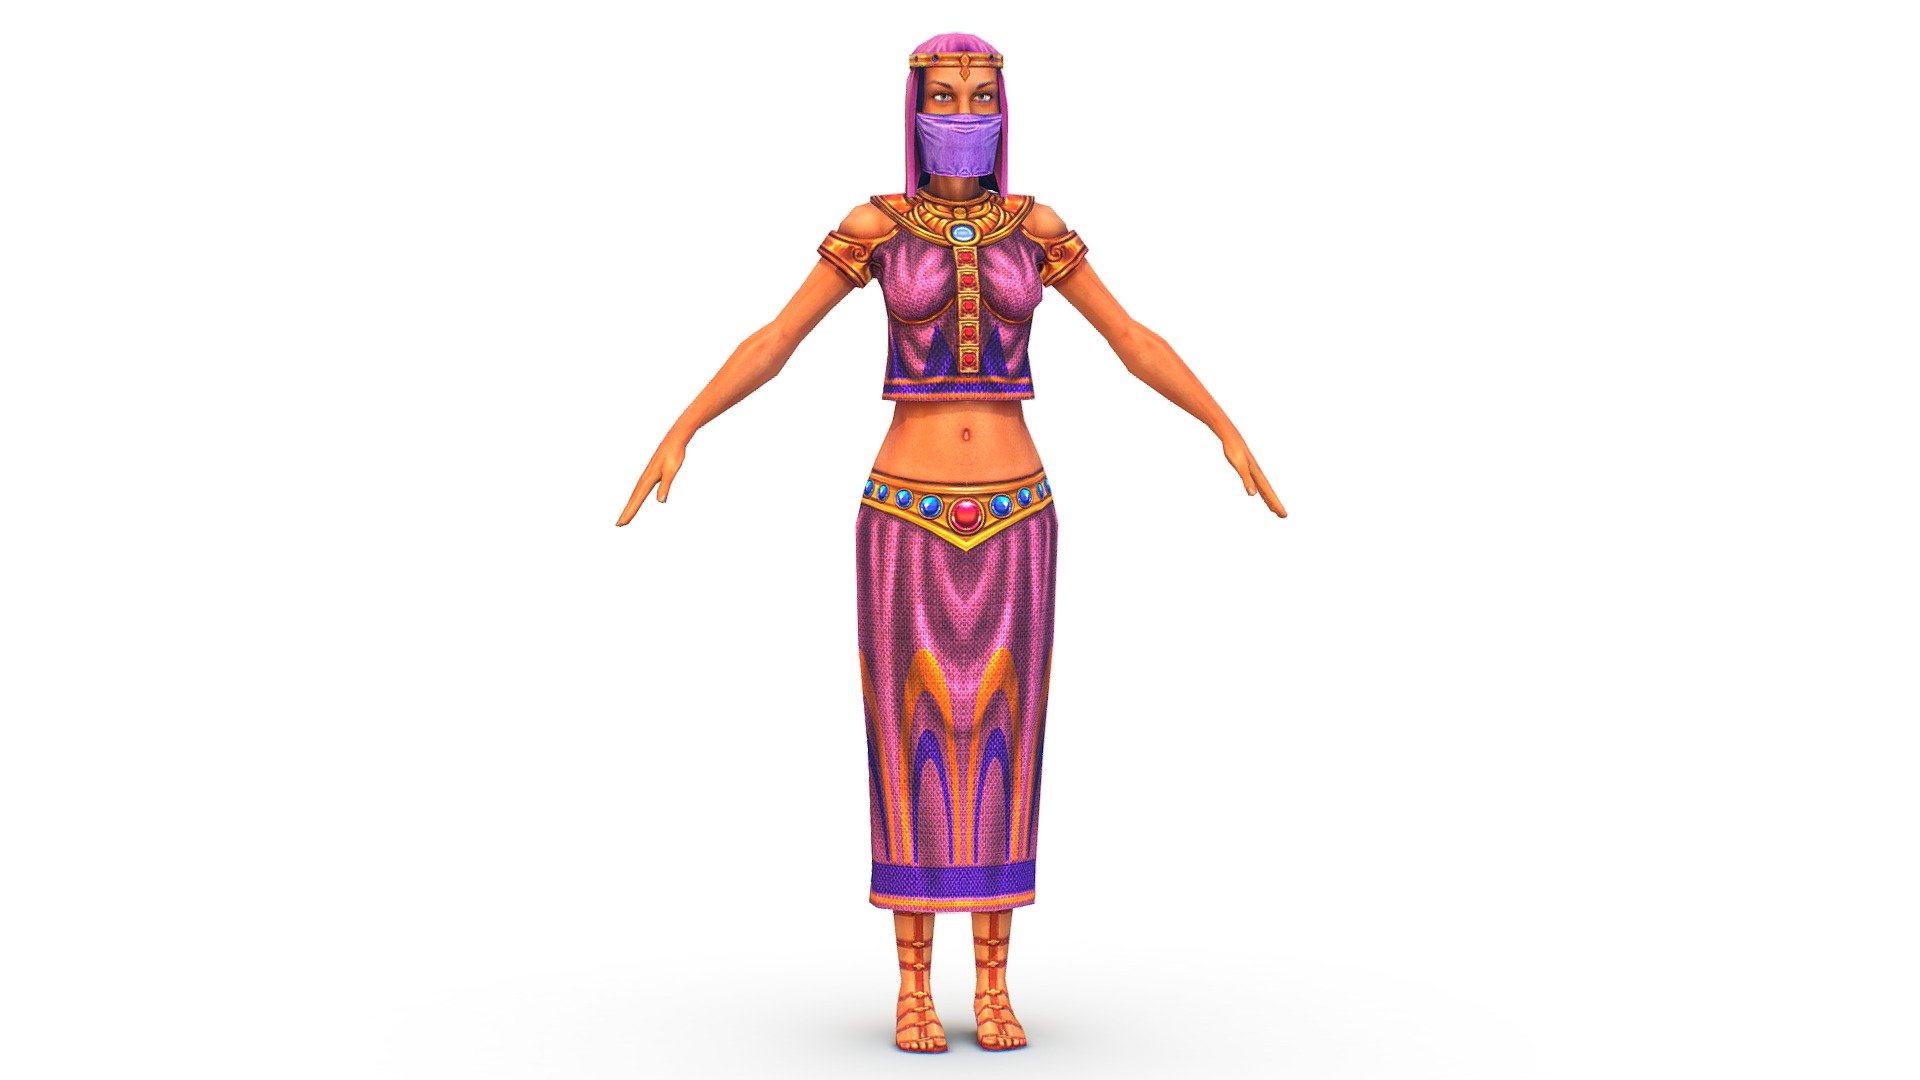 Arab dancer in national costume - 3dsMax file included/ texture 512 color only 3d model